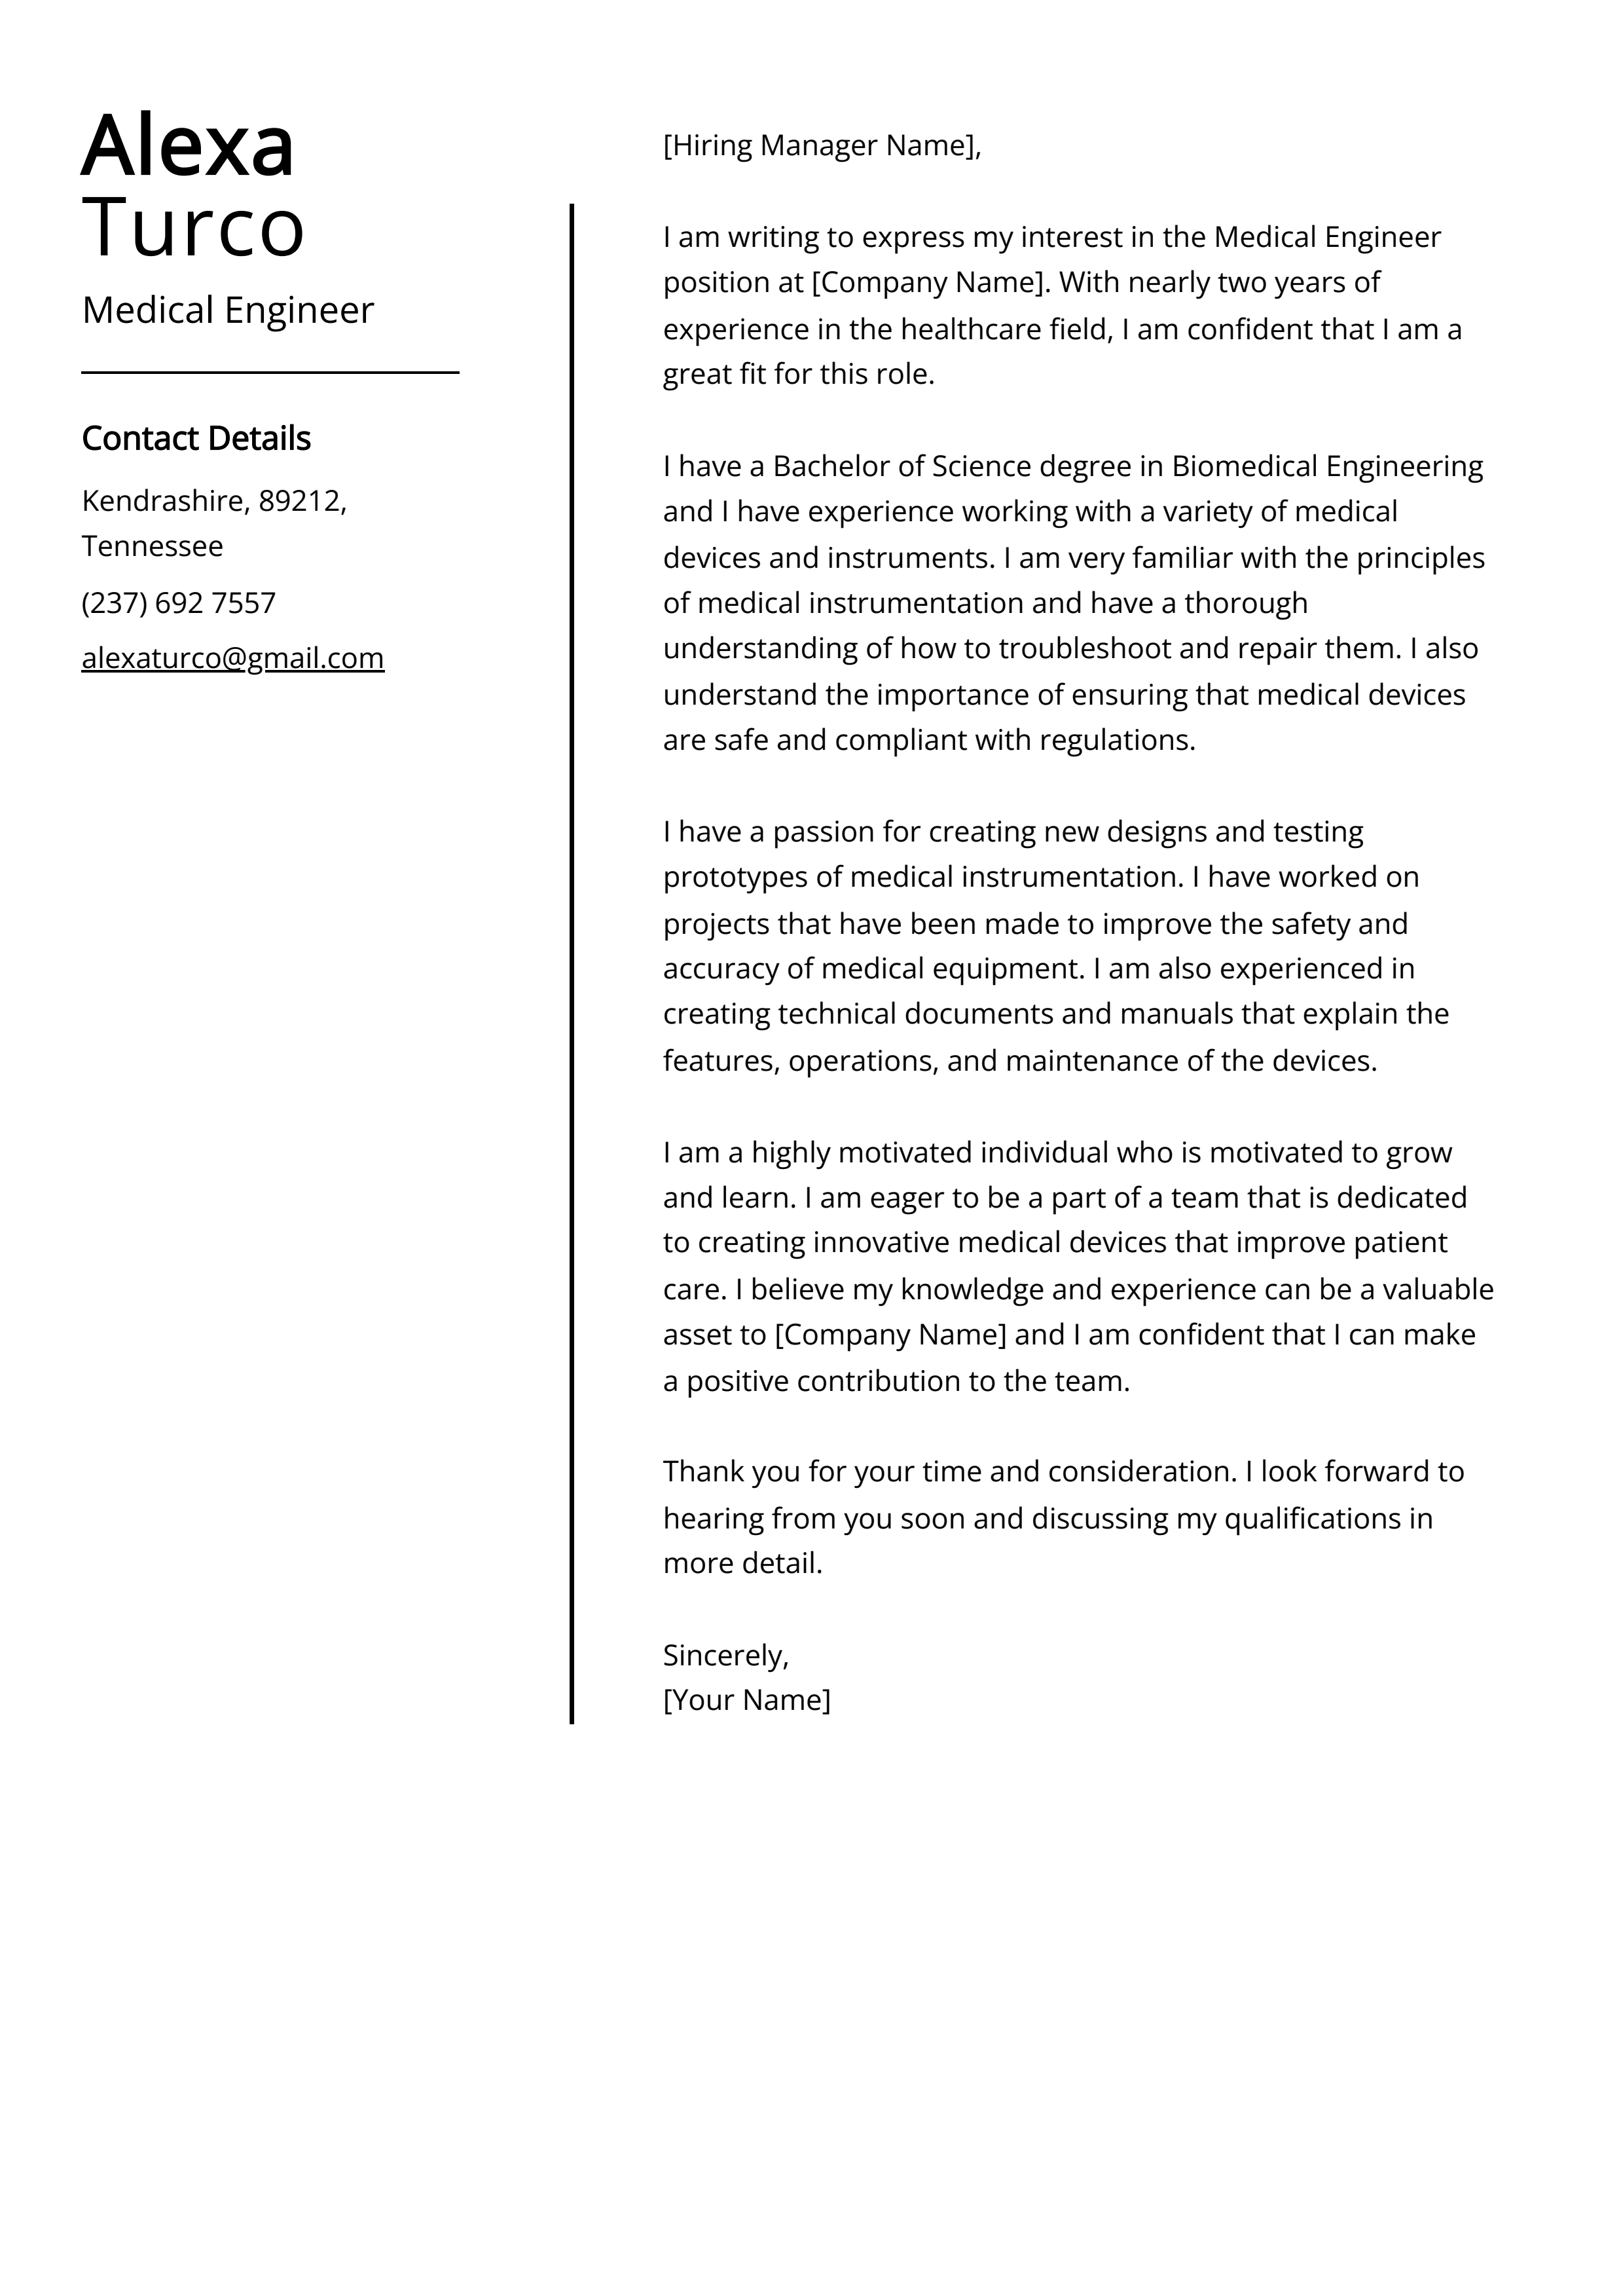 Medical Engineer Cover Letter Example